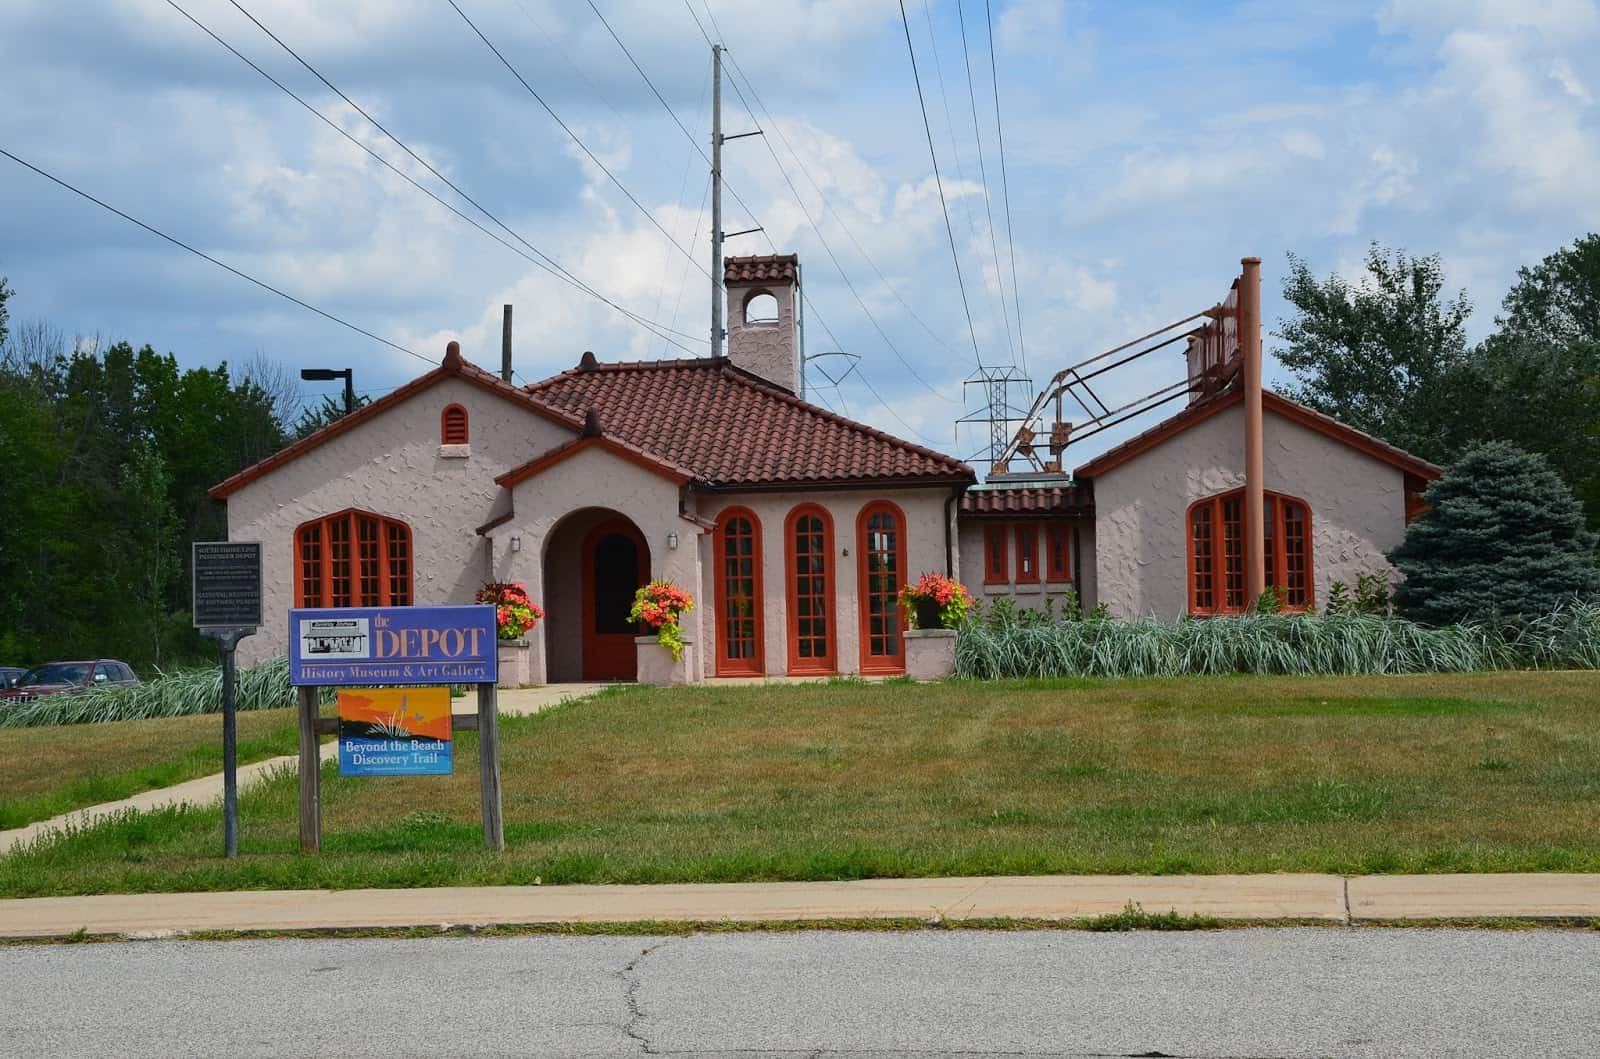 Beverly Shores Depot in Porter County, indiana